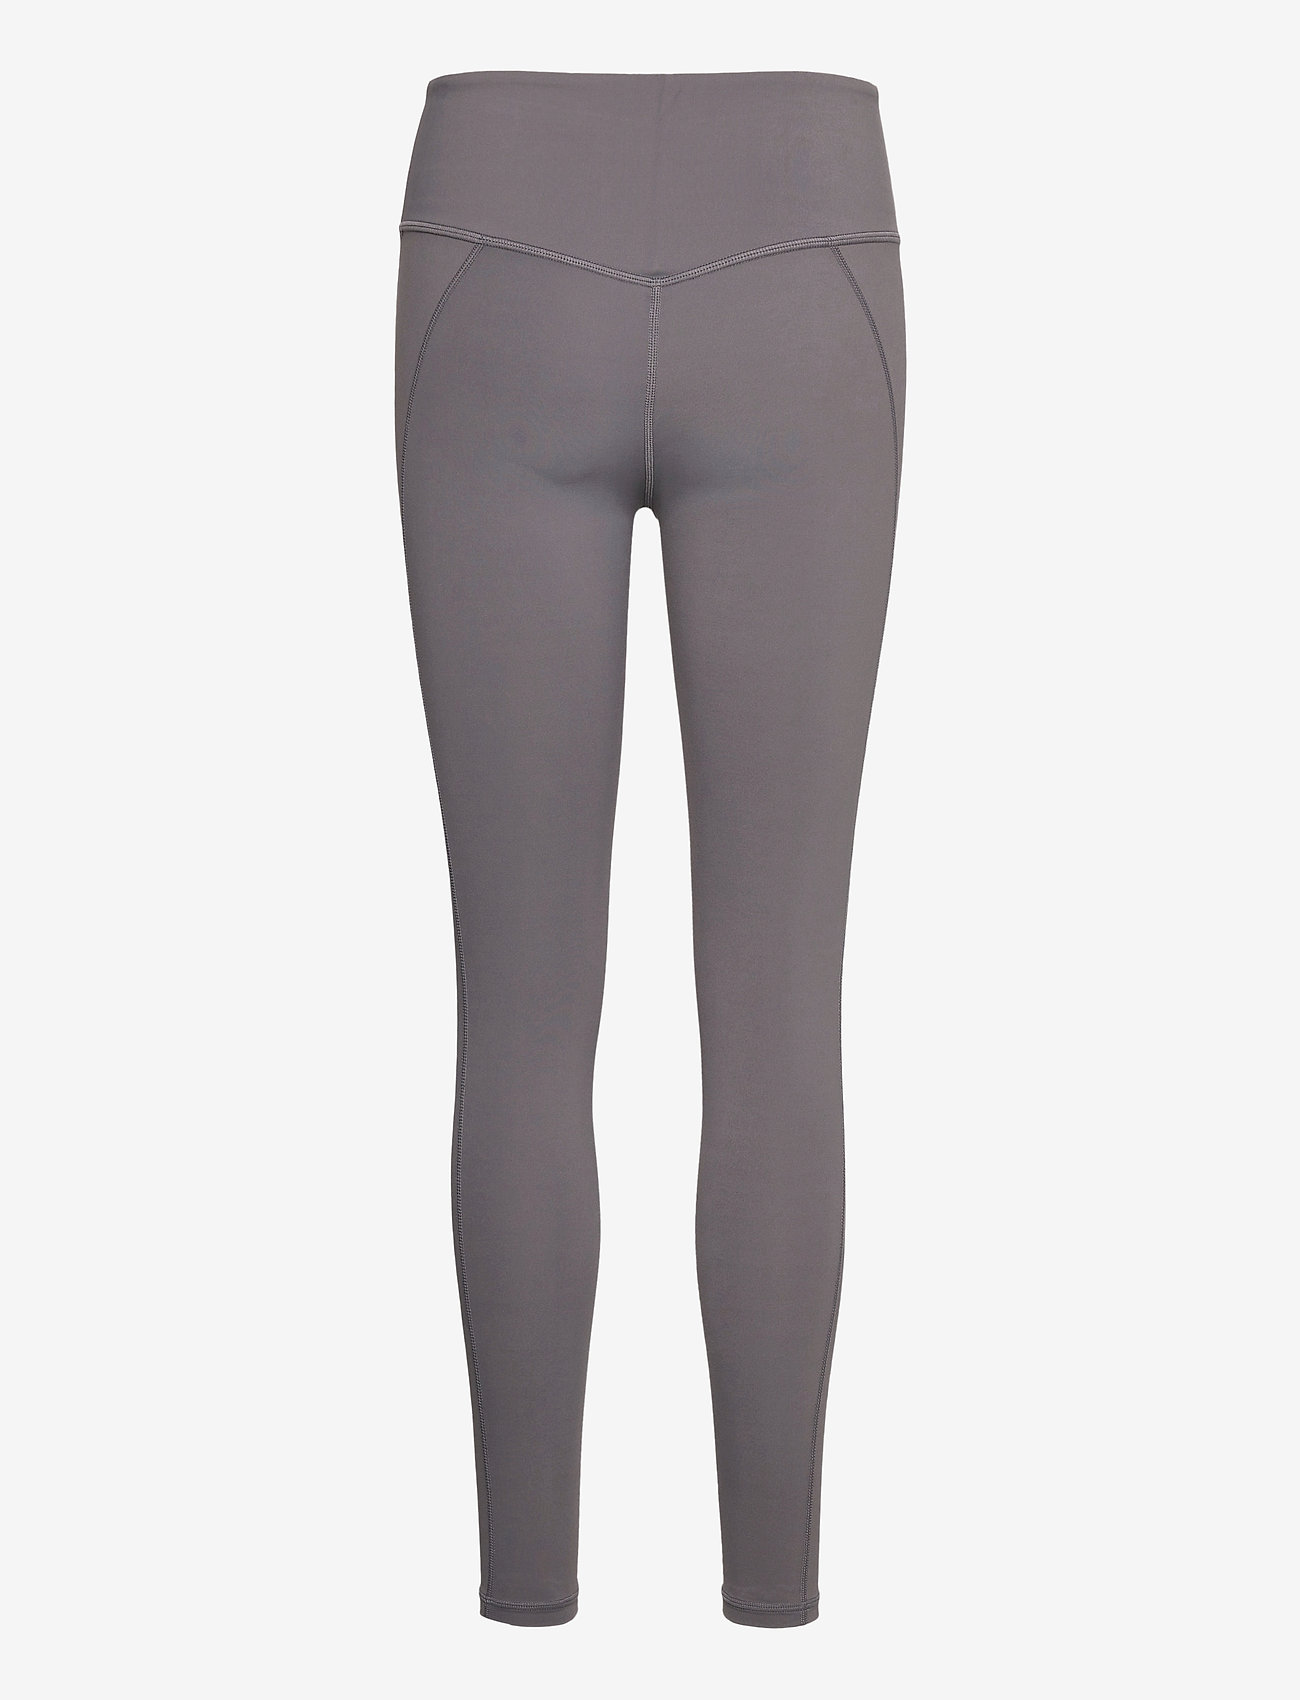 Famme - Gym Tights - running & training tights - grey - 1